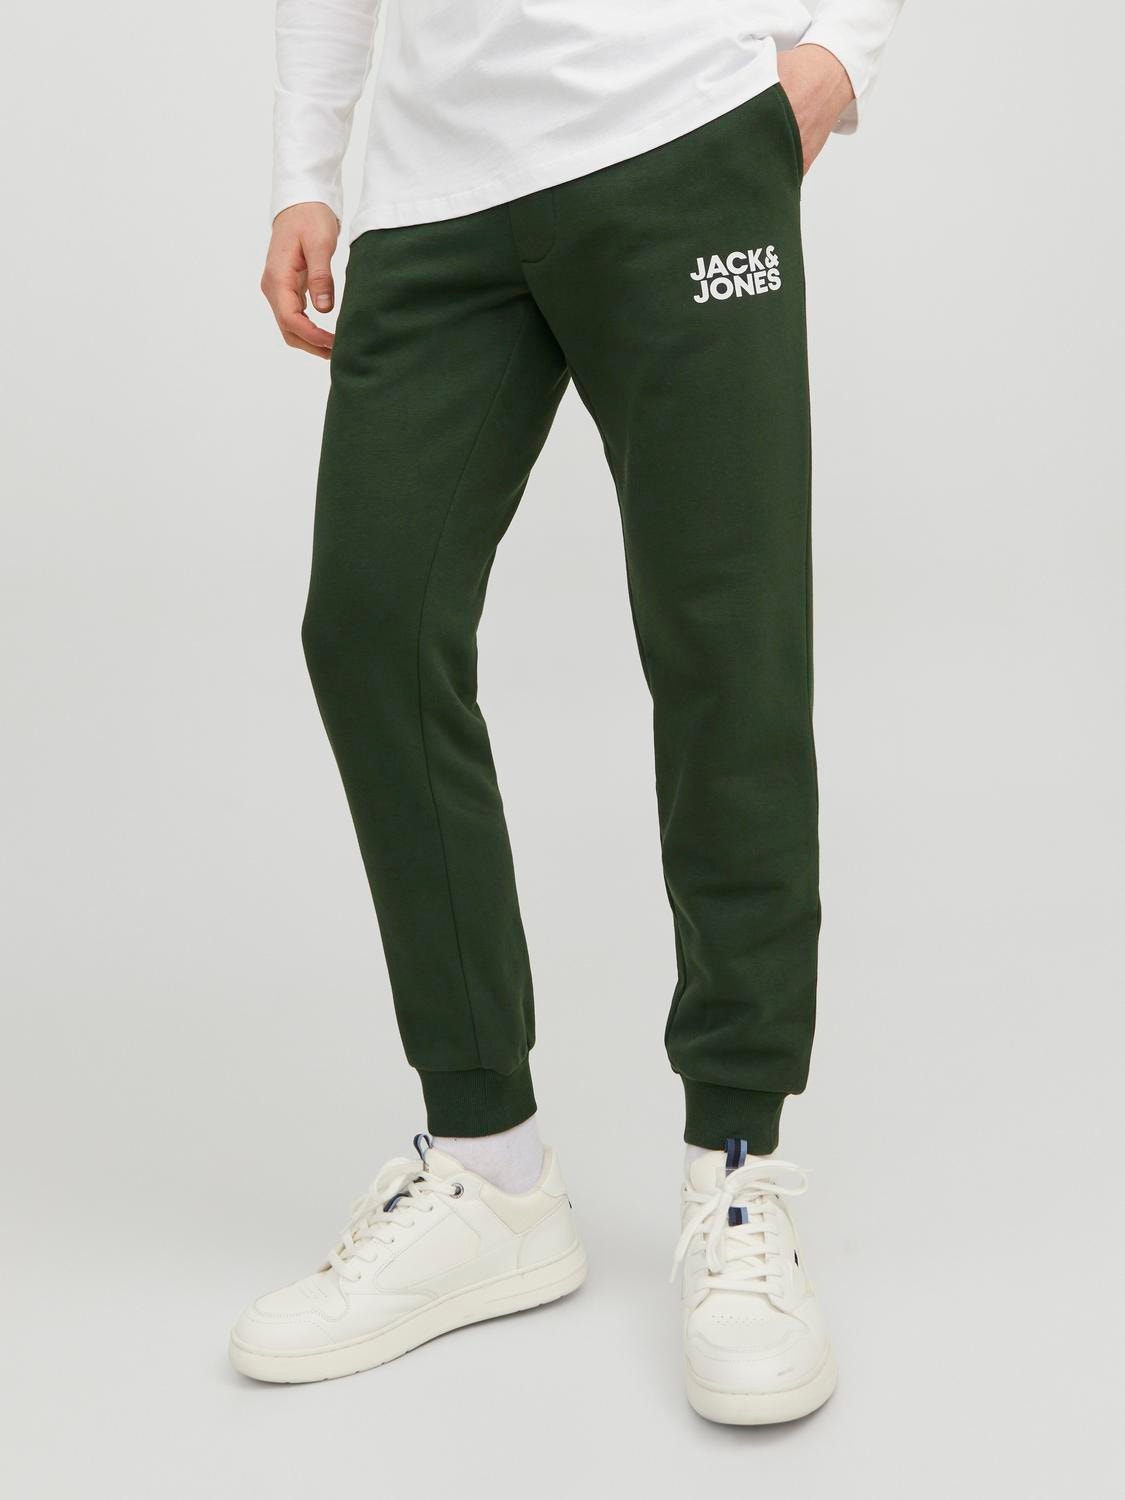 Regular Fit Joggers with 40% discount!